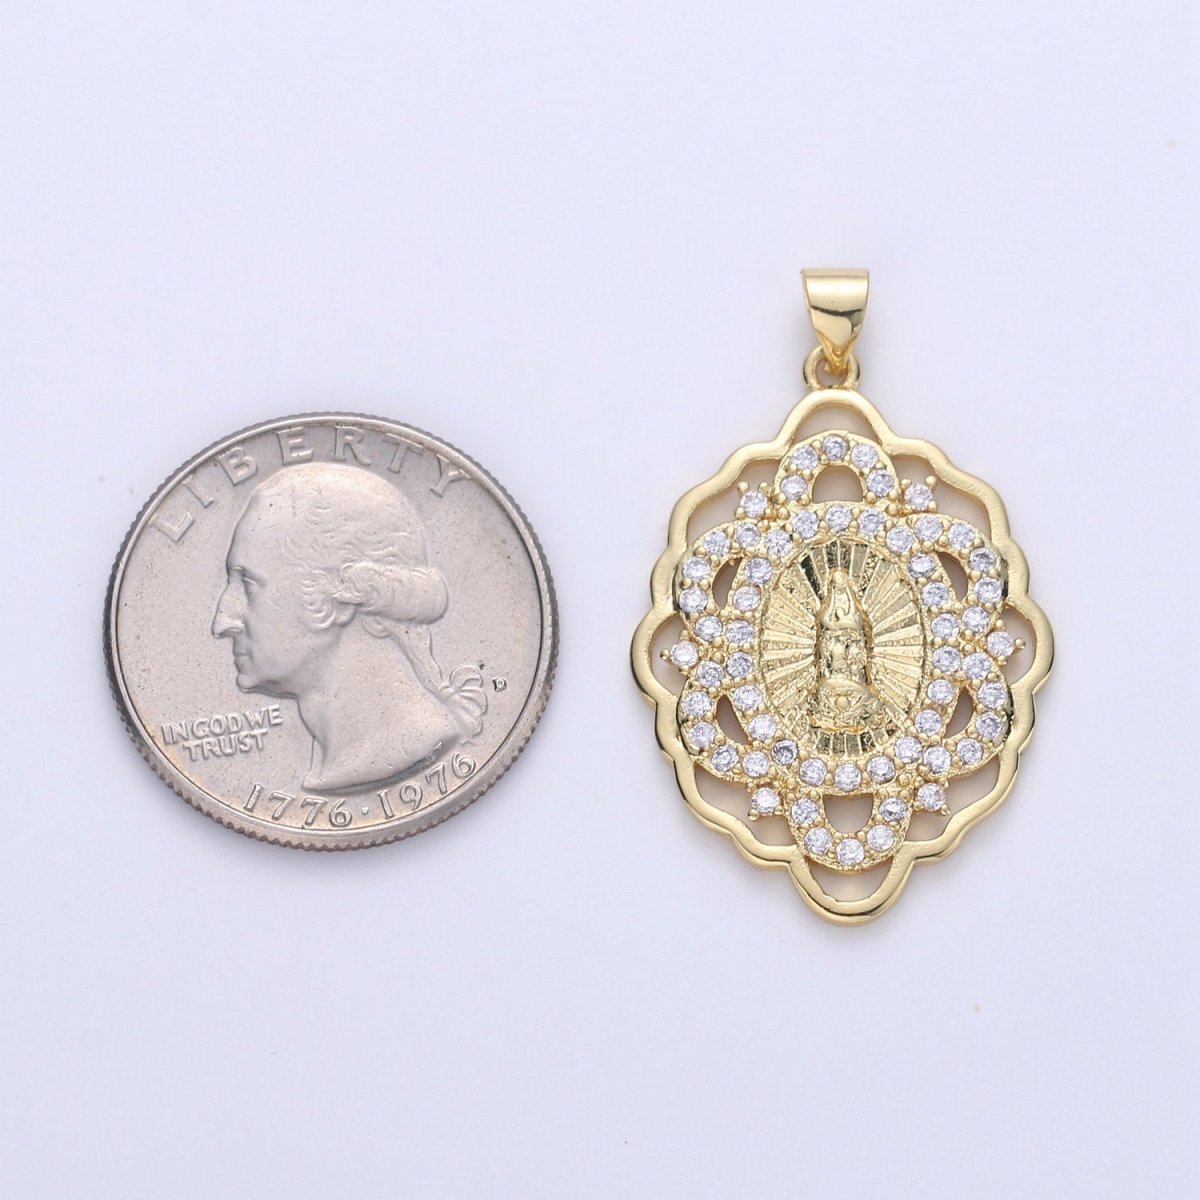 Gold Medallion Virgin Mary Pendant Sun Burst Pendant Round Coin Pendant in 24K Gold Filled Religious Jewelry Charm Pendant for Necklace I-640 - DLUXCA